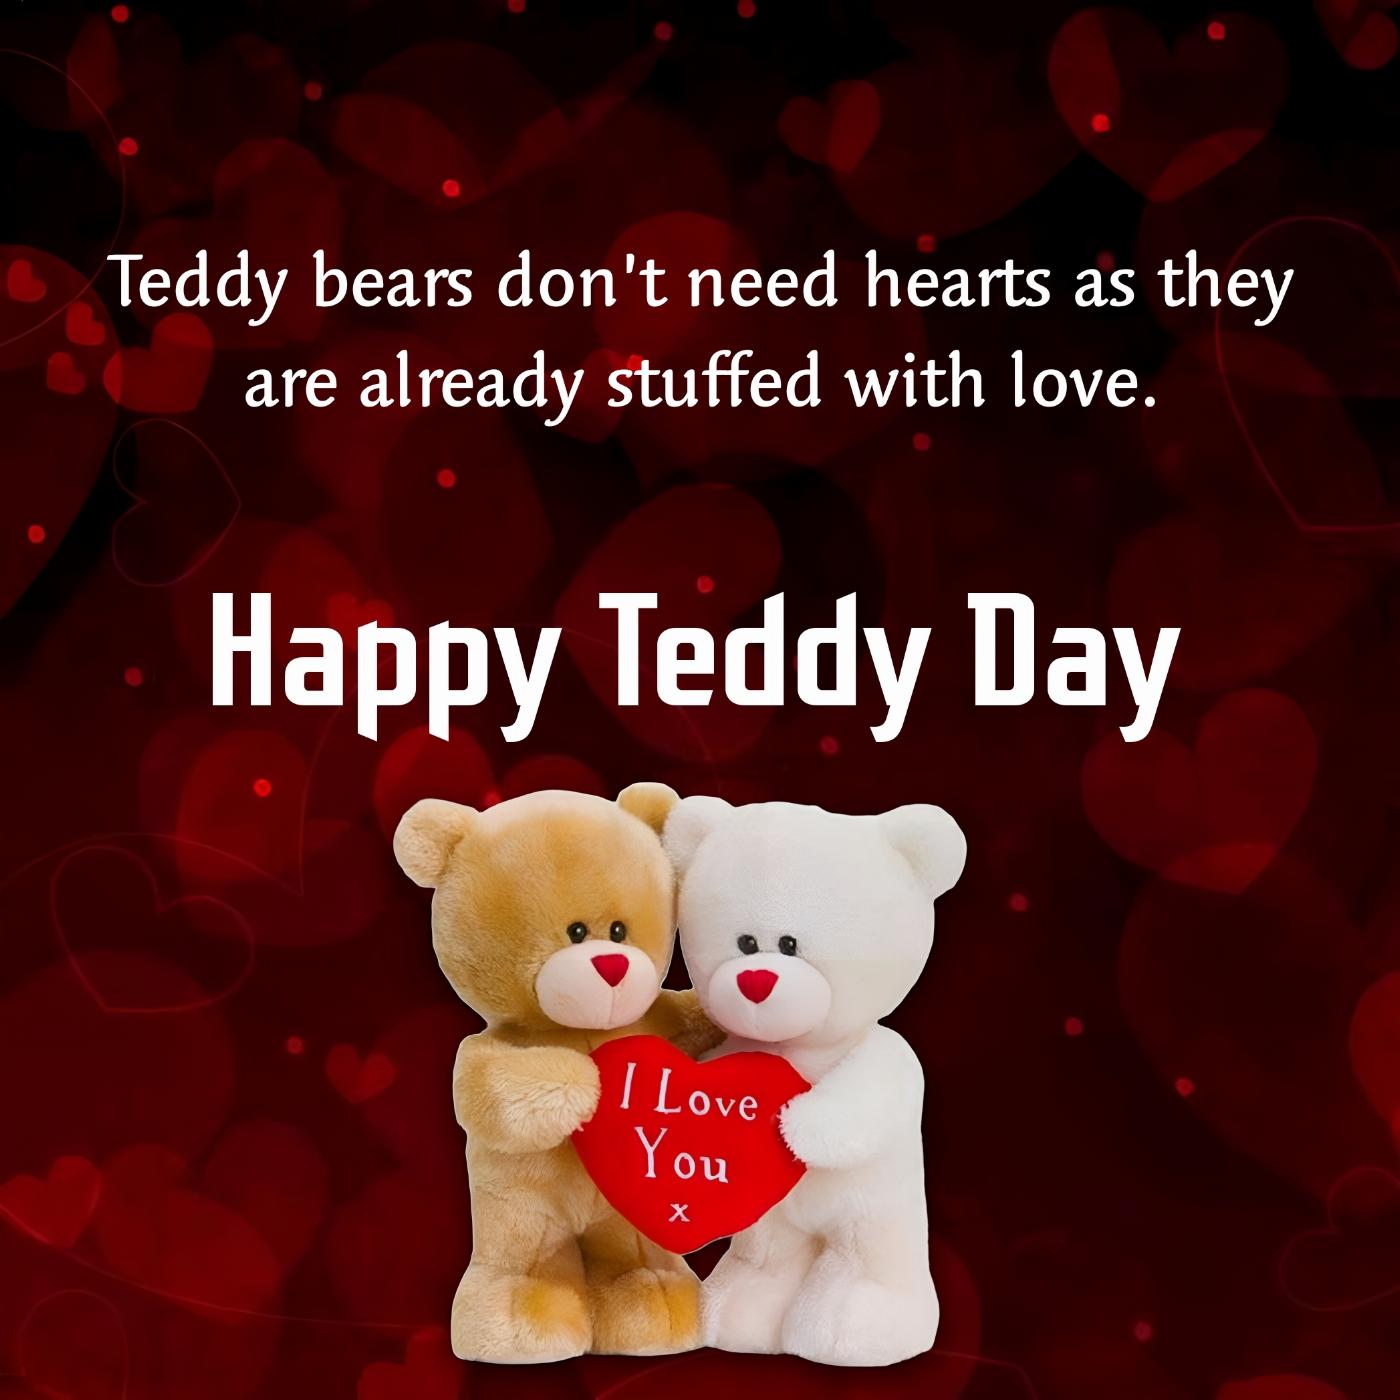 Teddy bears dont need hearts as they are already stuffed with love